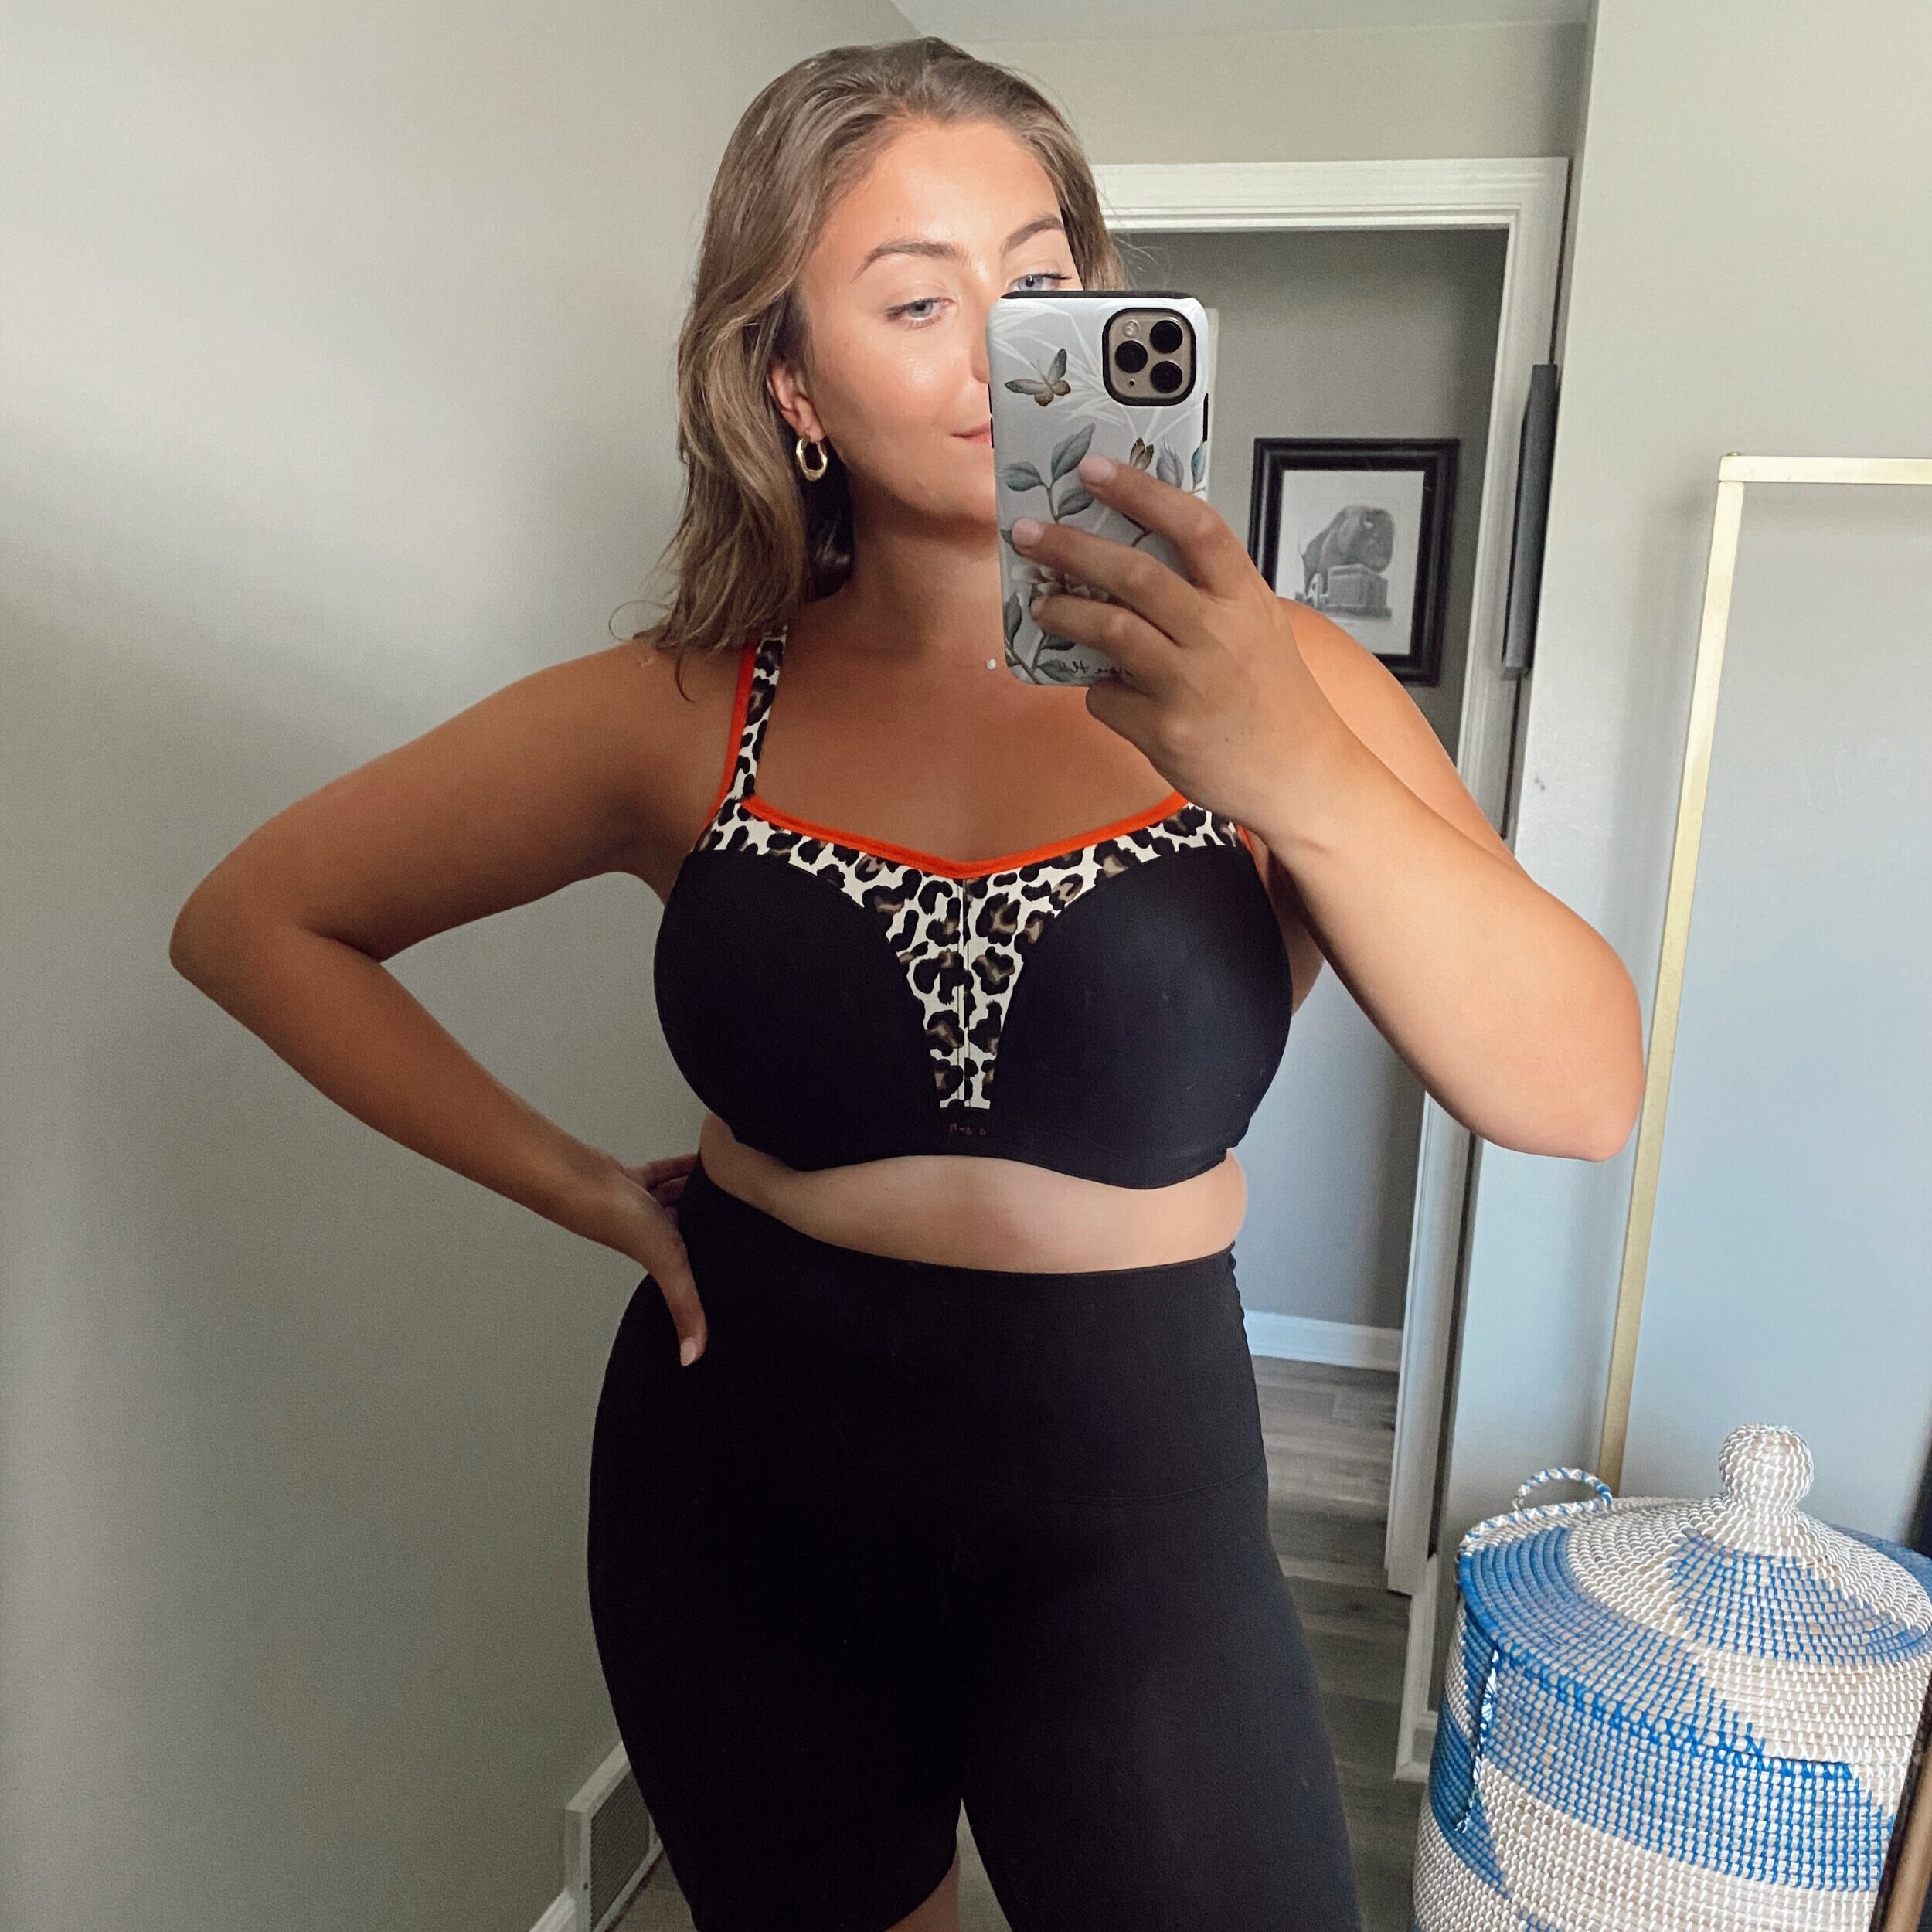 Current Sports Bra Favorites (That Are Actually Supportive